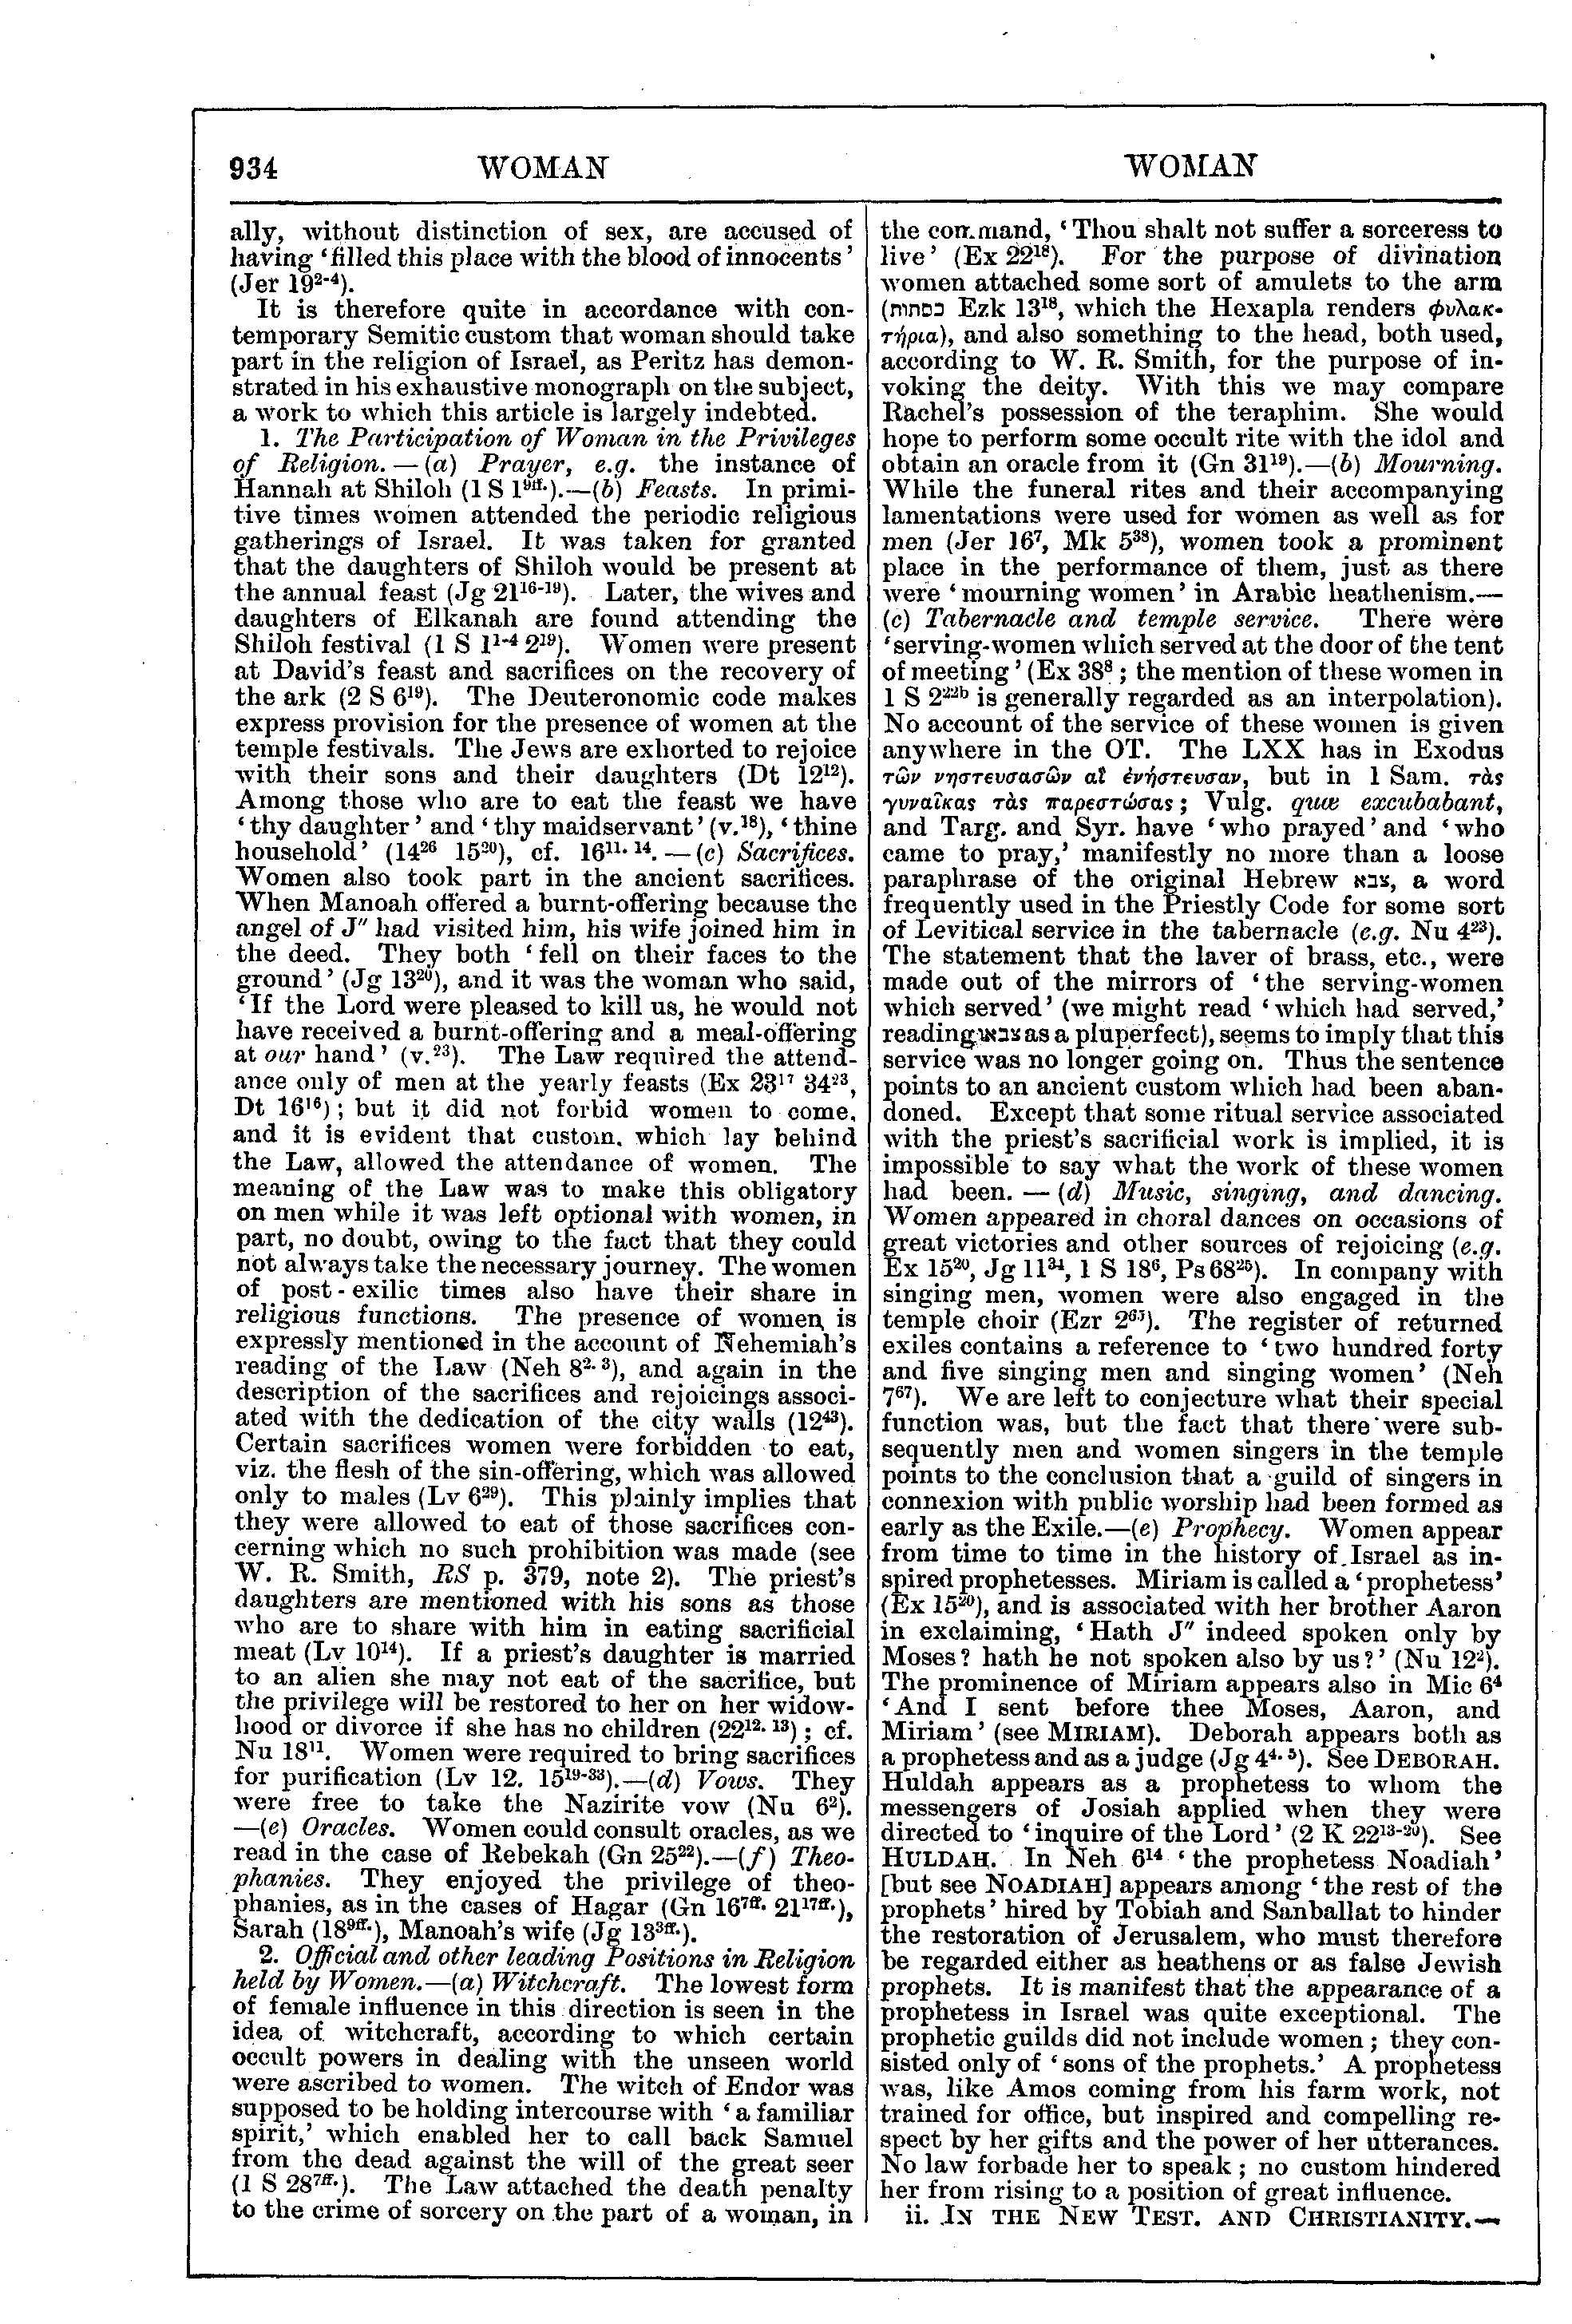 Image of page 934